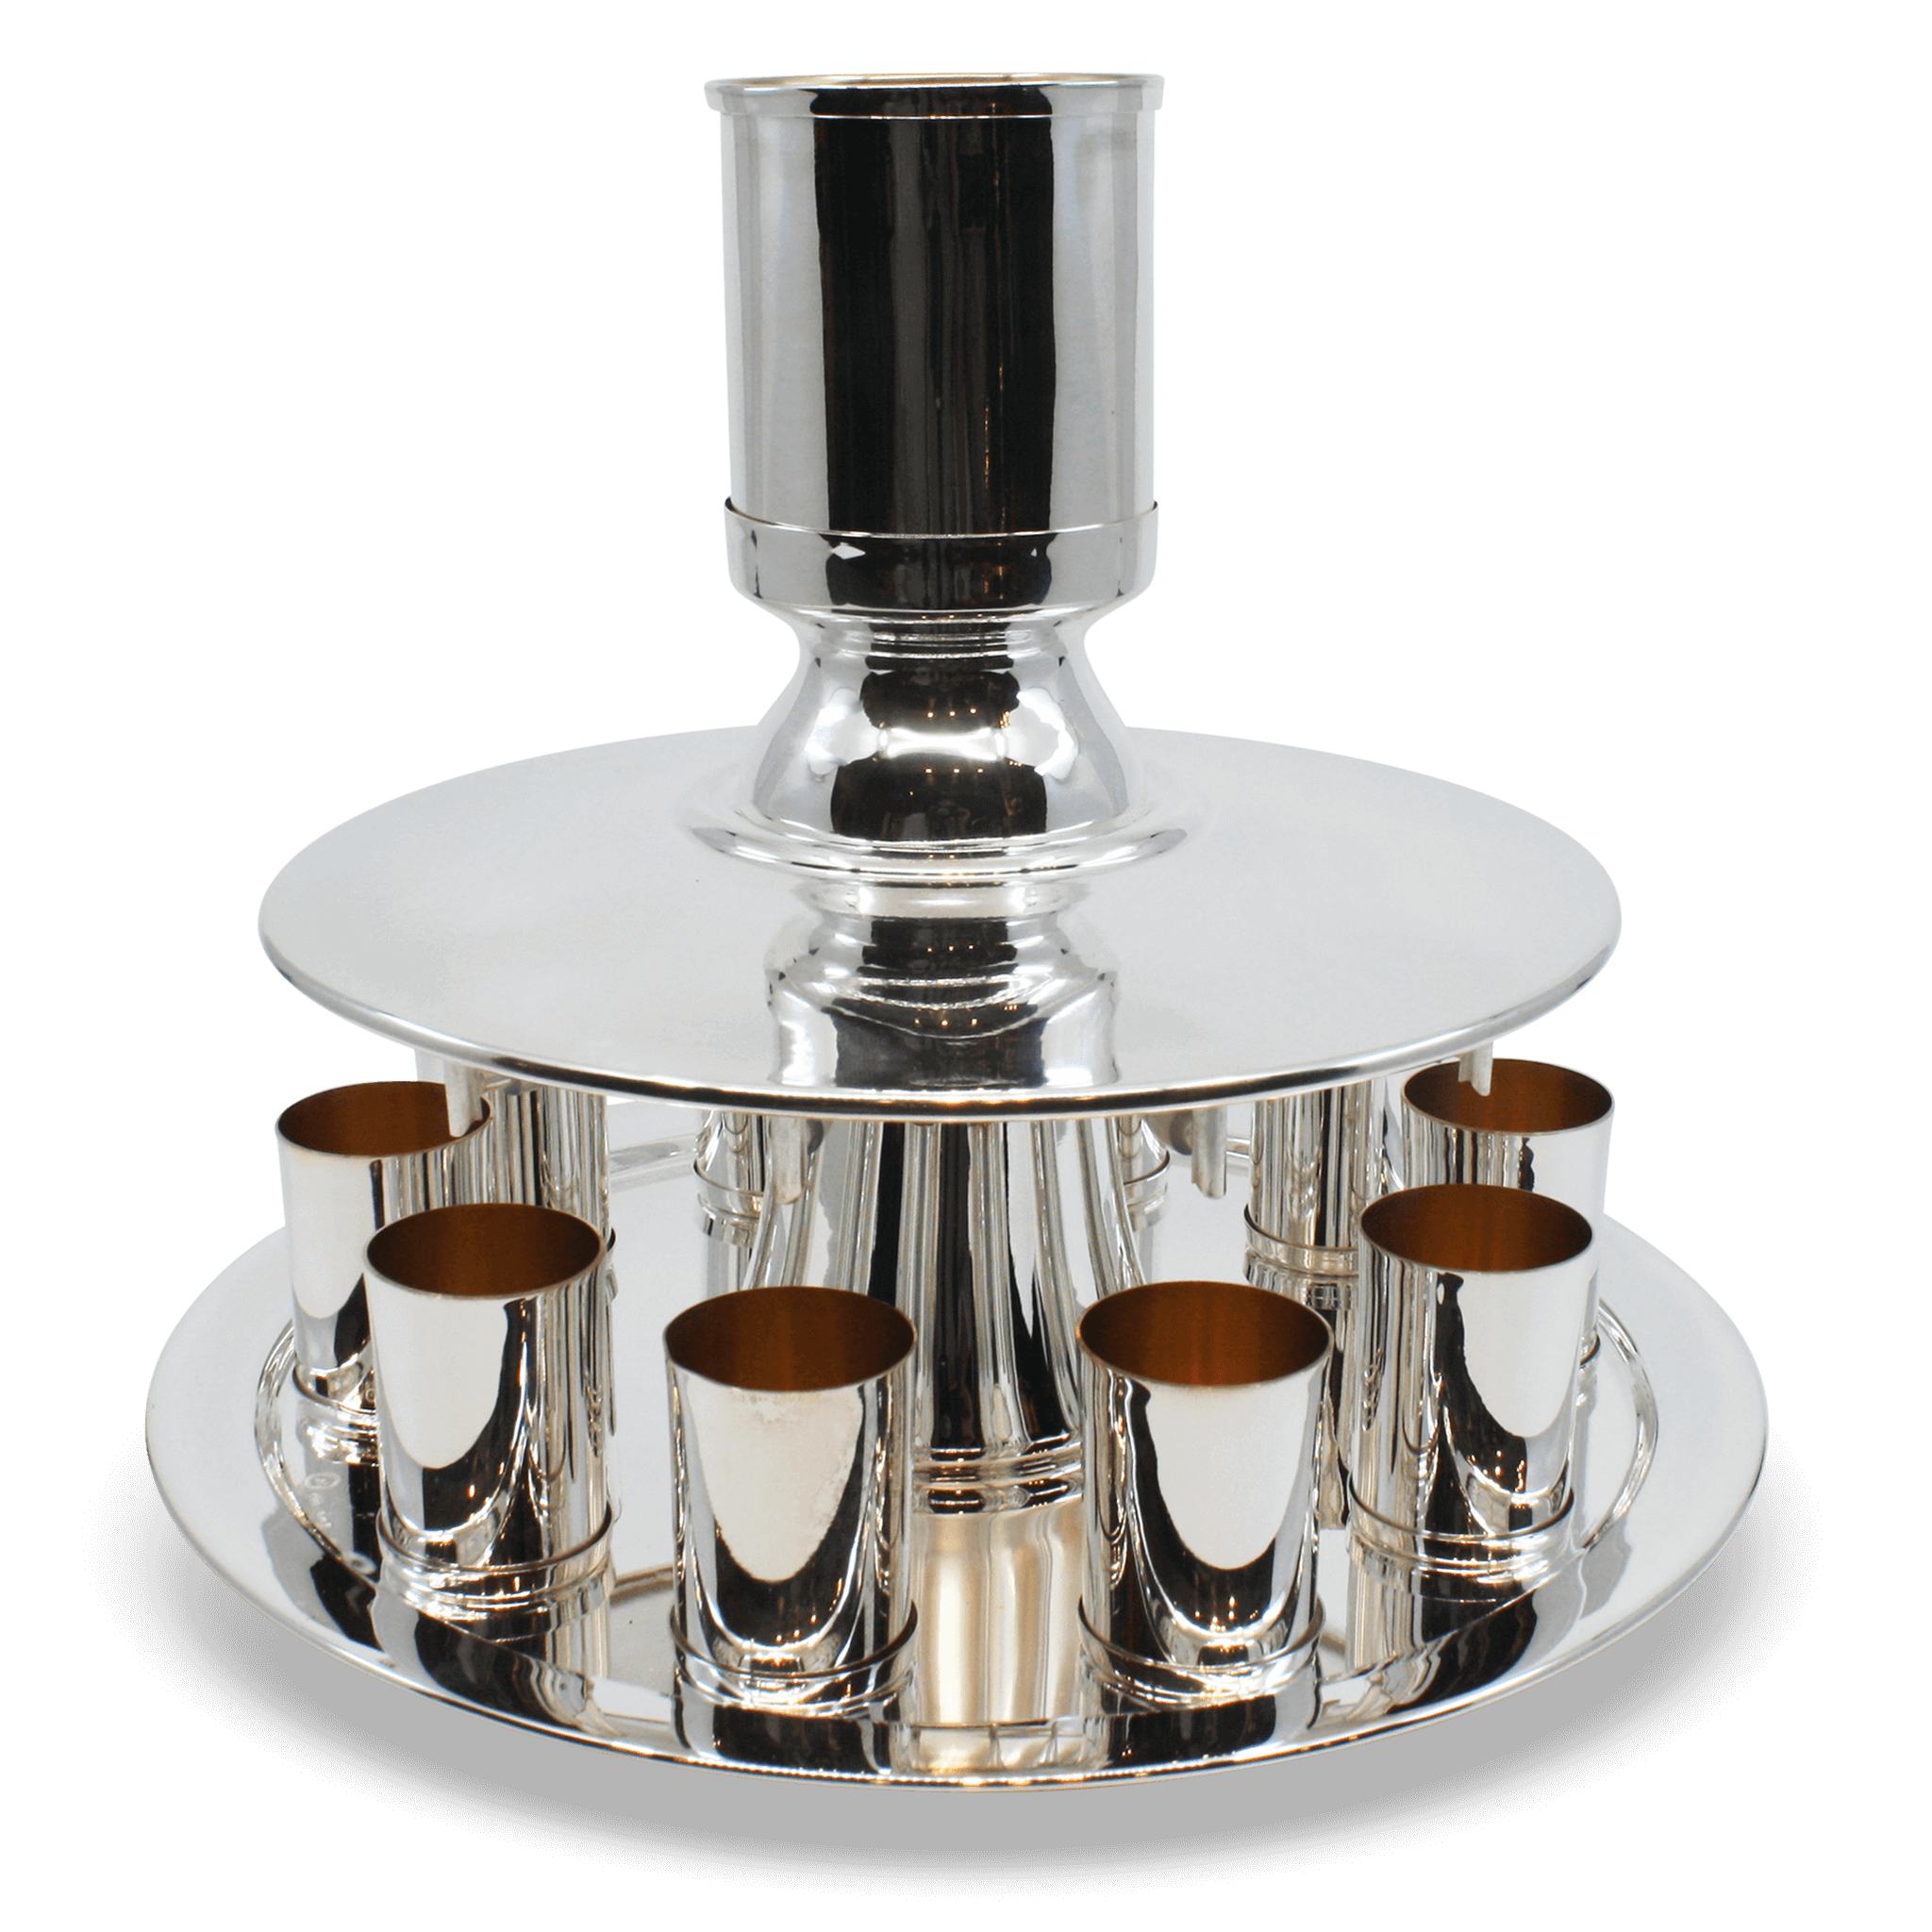 SILVER WINE FOUNTAIN FOR 10 - Piece By Zion Hadad